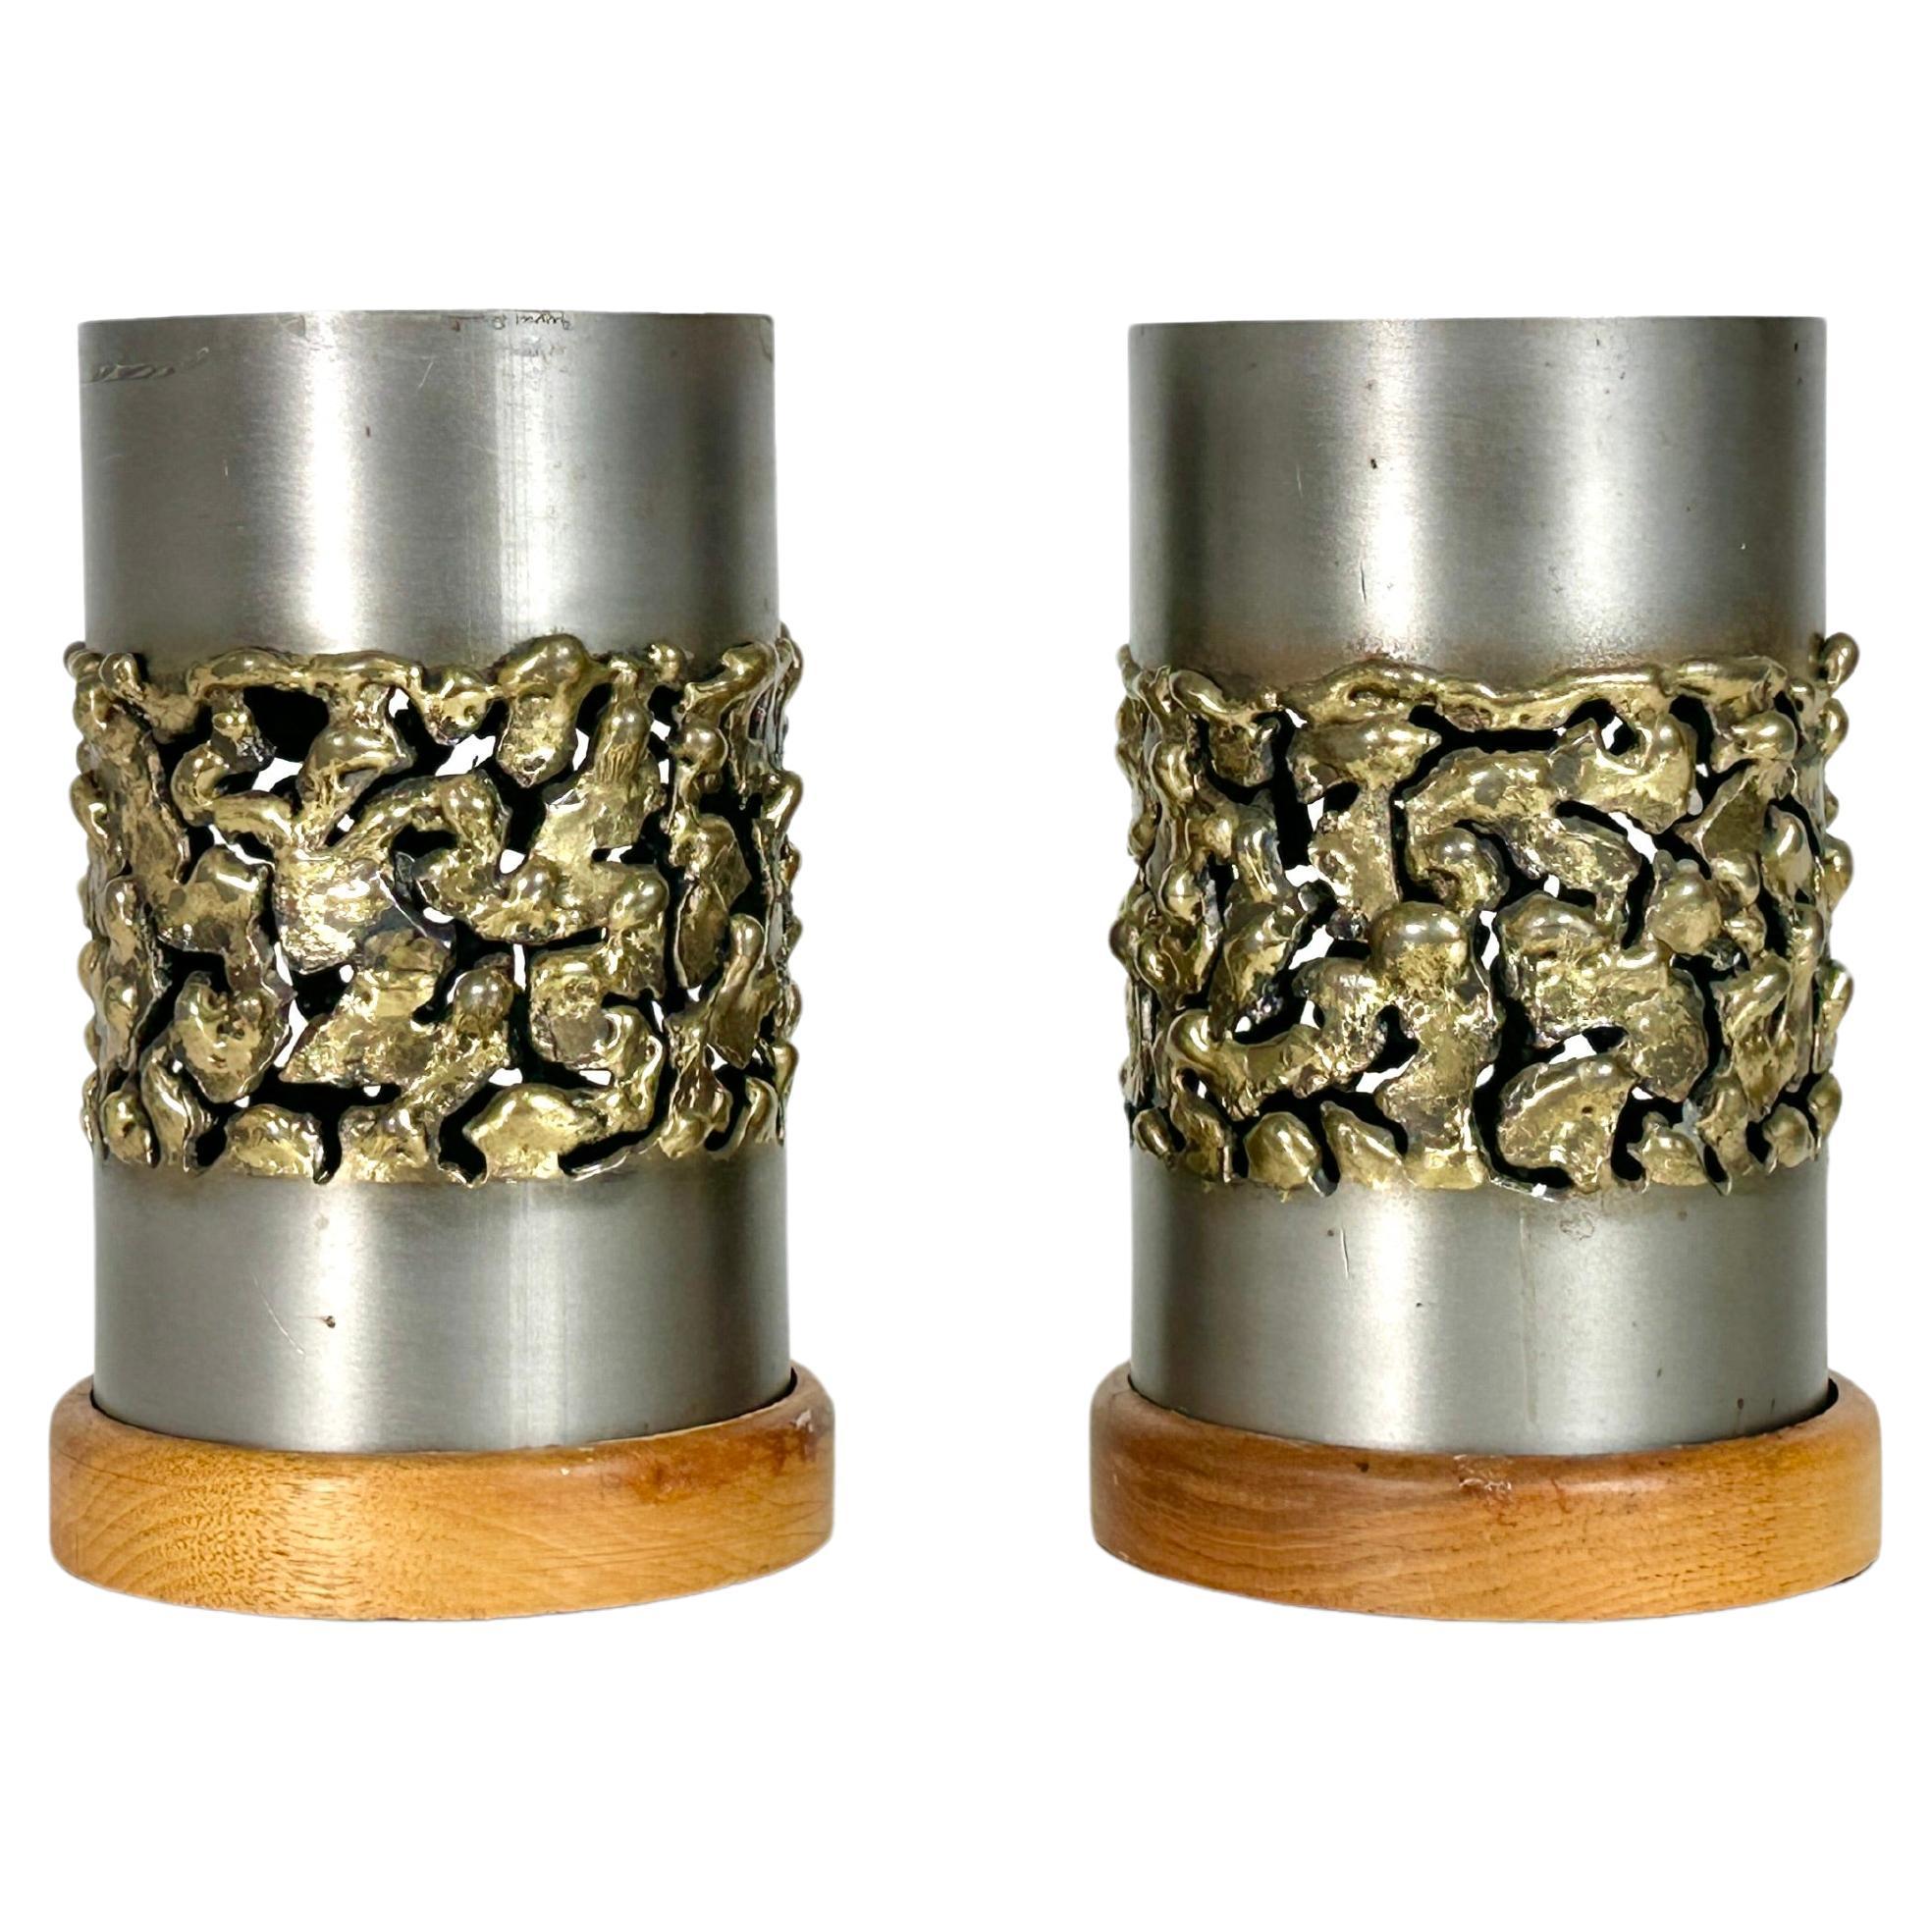 Pair of Mid Century Modern Brutalist Hurricane Candle Holders by Jerry Davis